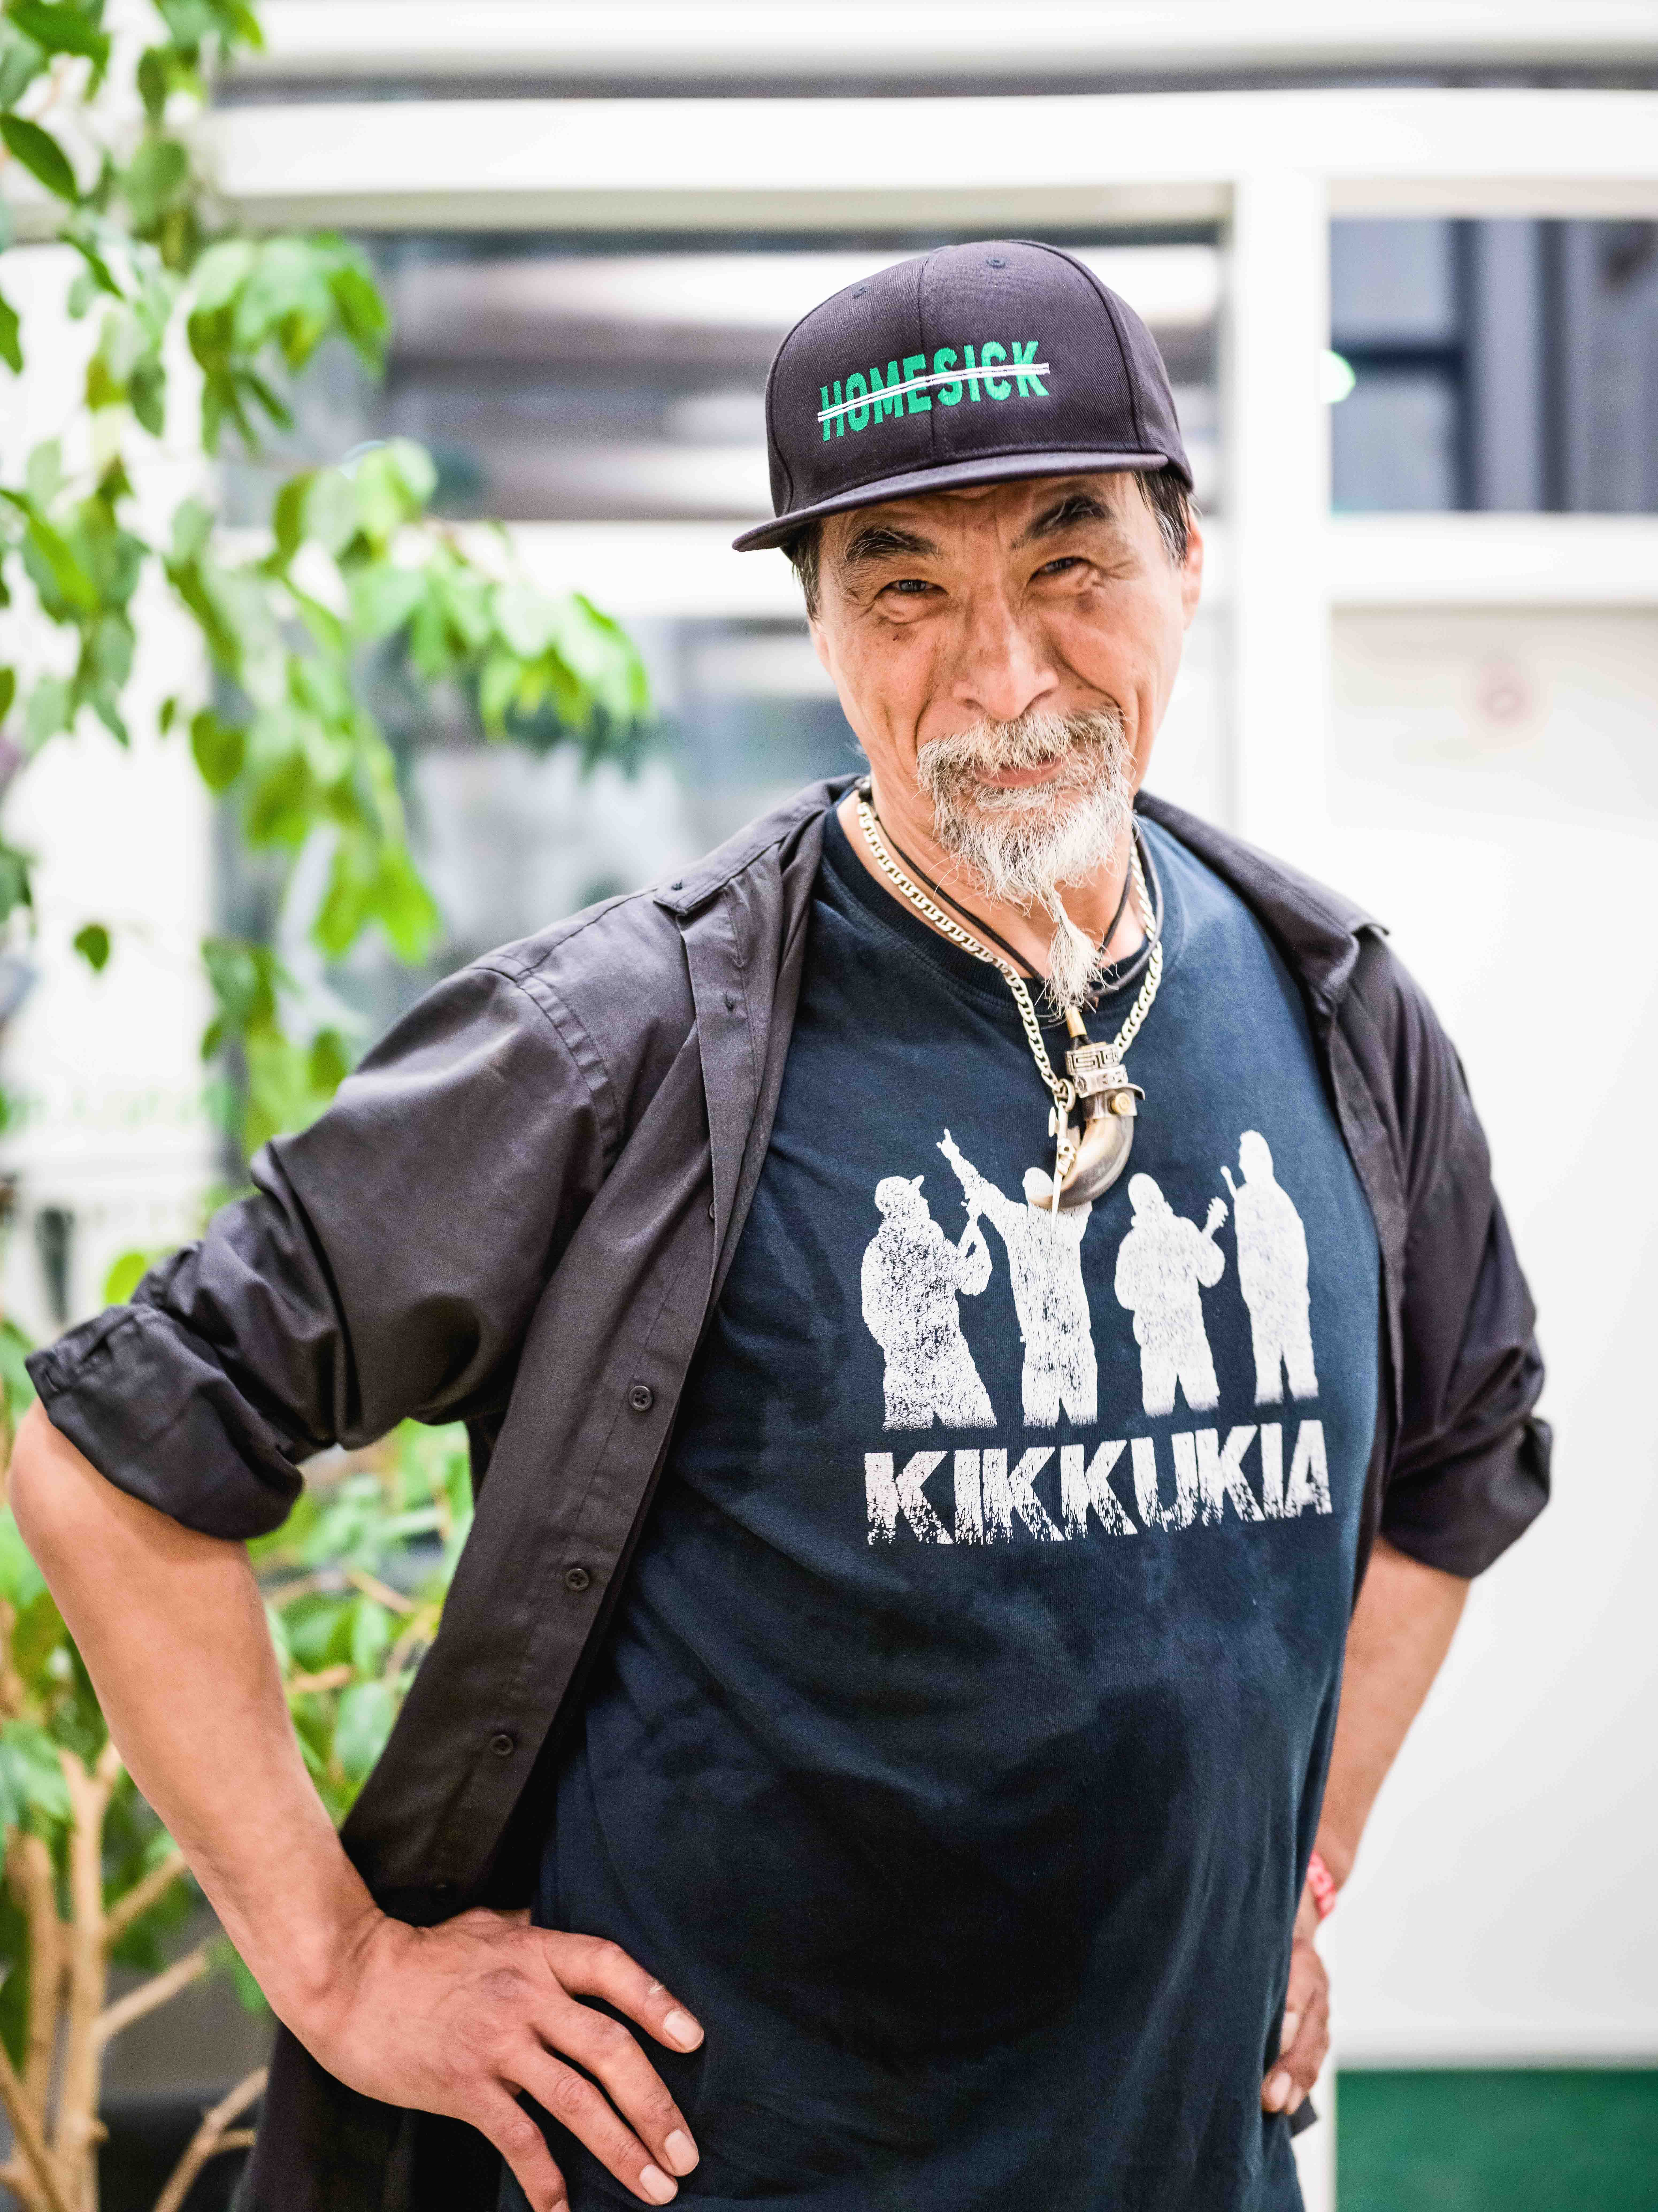 An older man man with a white goatee and dark eyebrows smiles at the camera while wearing a baseball cap with the word Homesick on it, and a dark blue-green t-shirt that reads Kikkukia. His hands are on his hips.